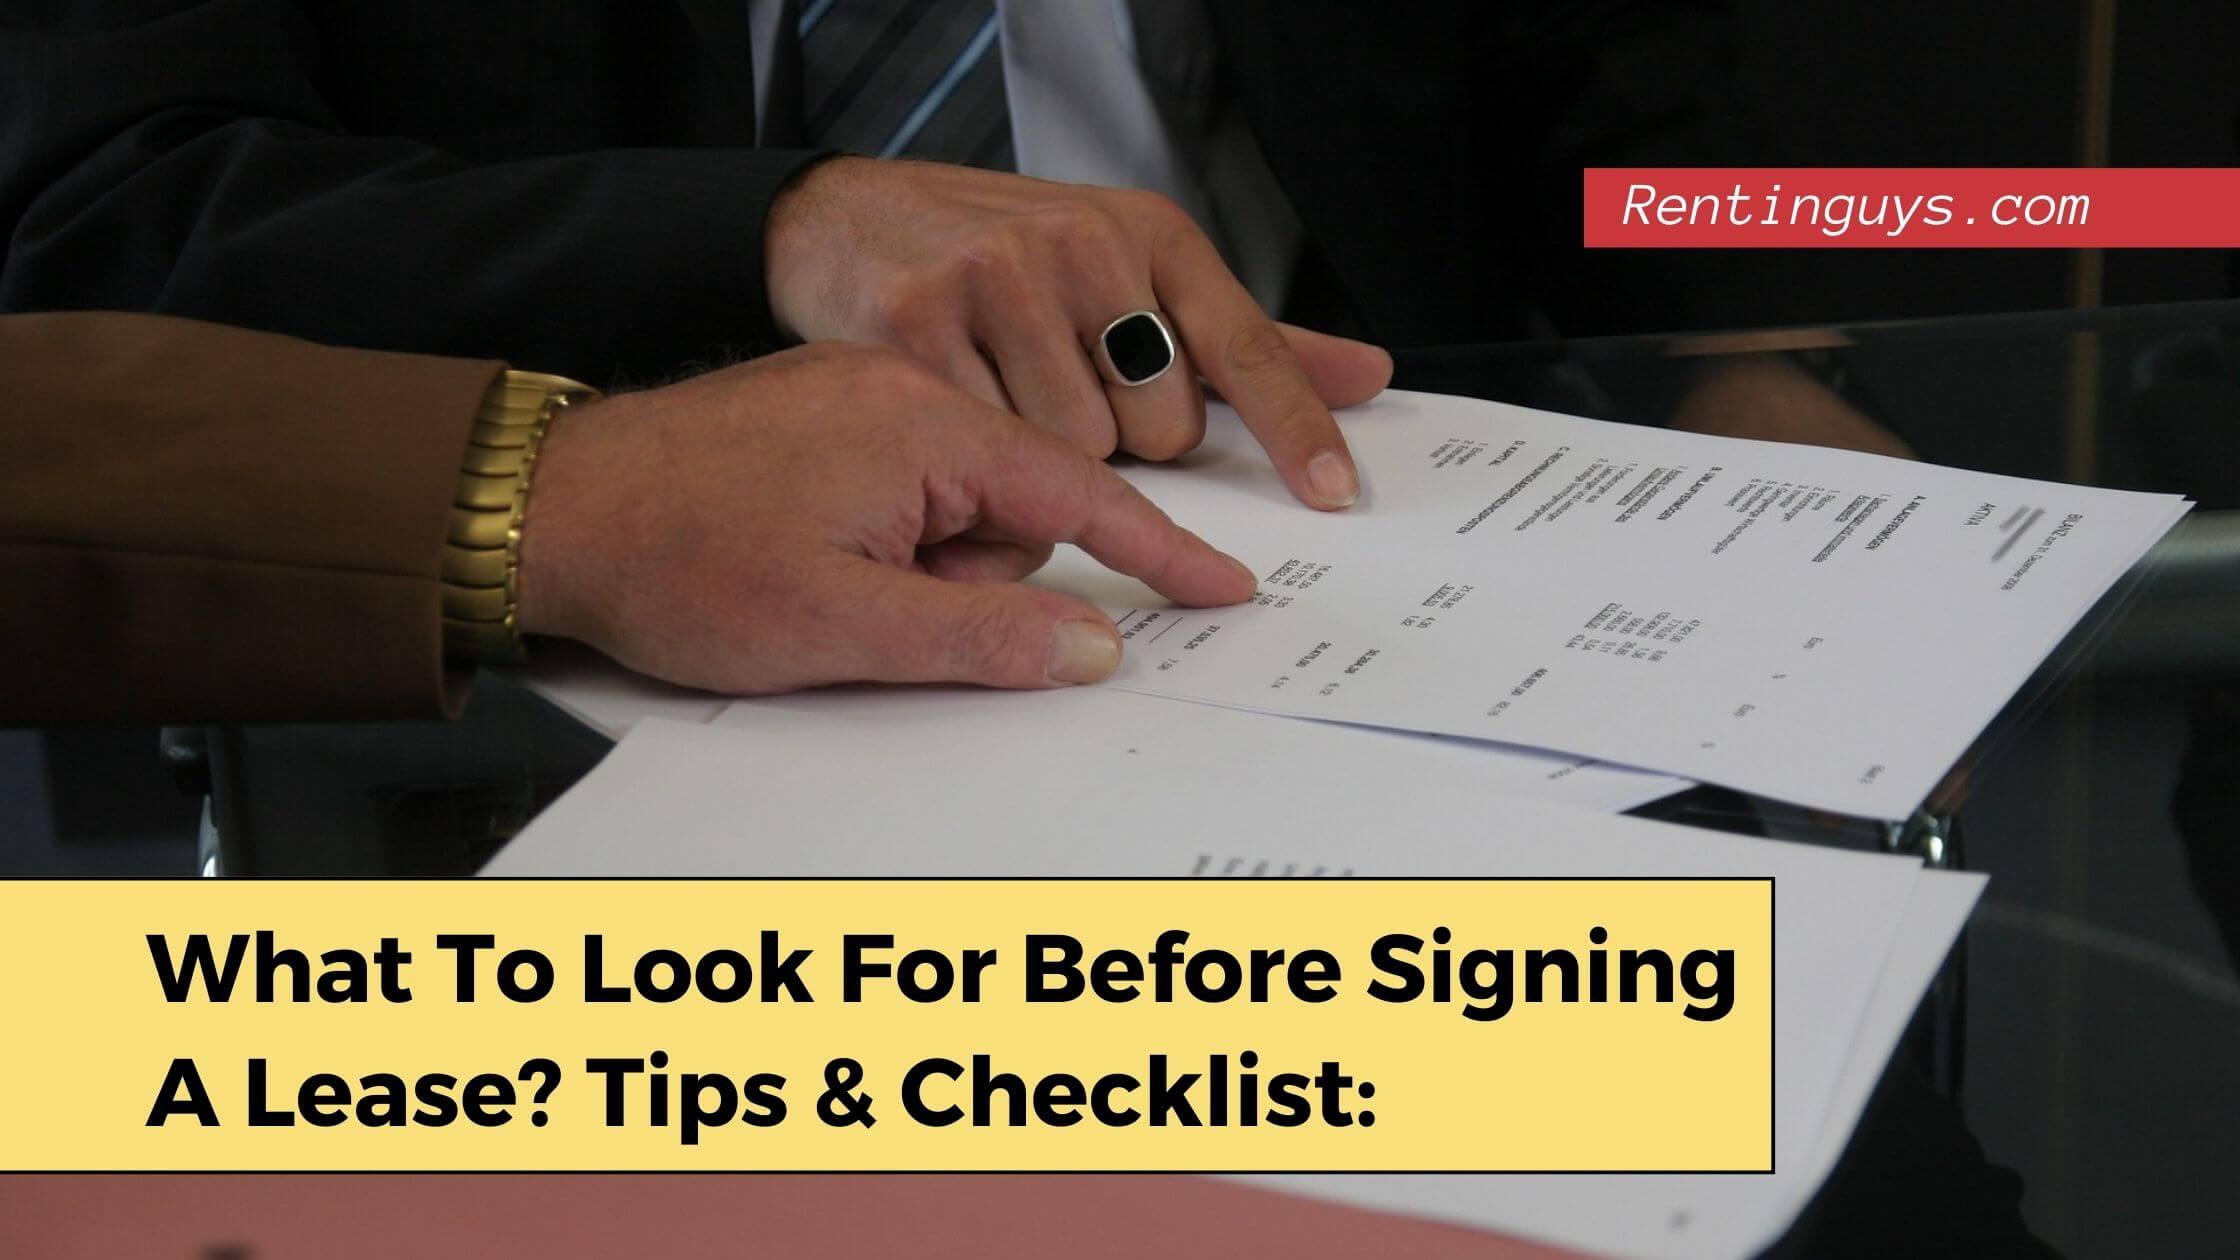 What To Look For Before Signing A Lease? Tips & Checklist